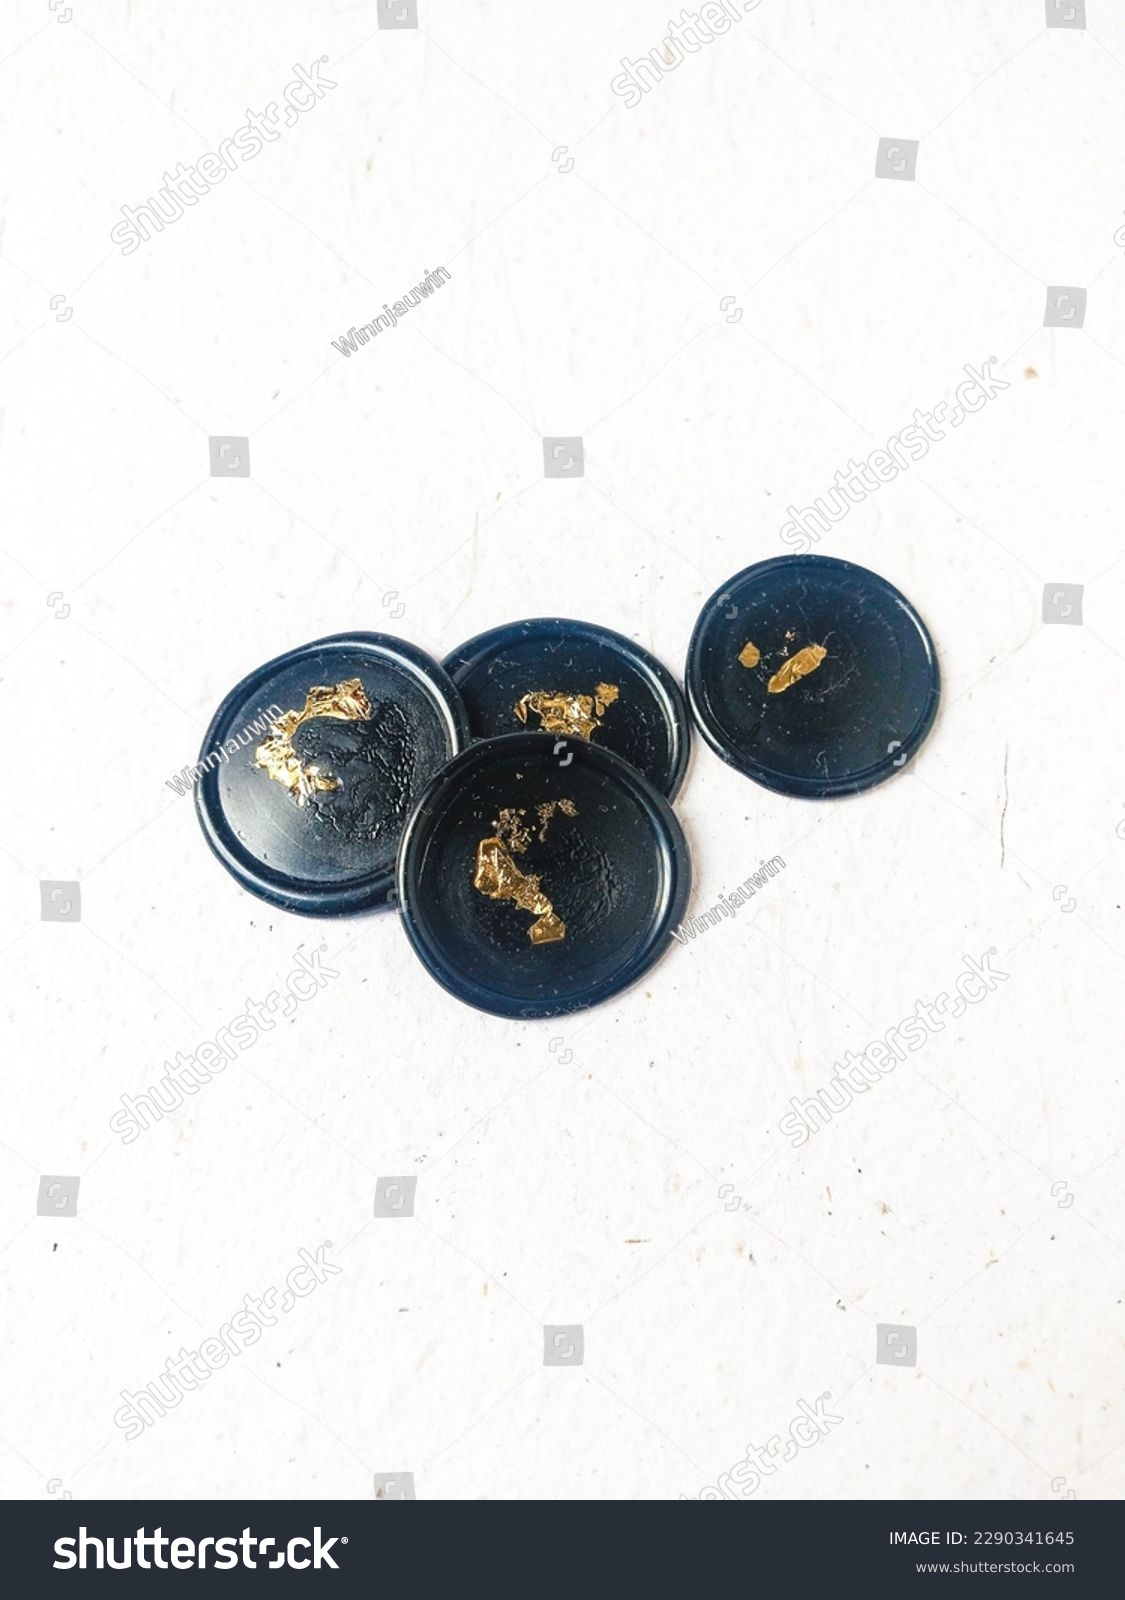 A bunch of black with gold foil blank pattern wax stamp or wax seal coins on a white background. Can be use for vintage antique wedding invitation or decoration #2290341645